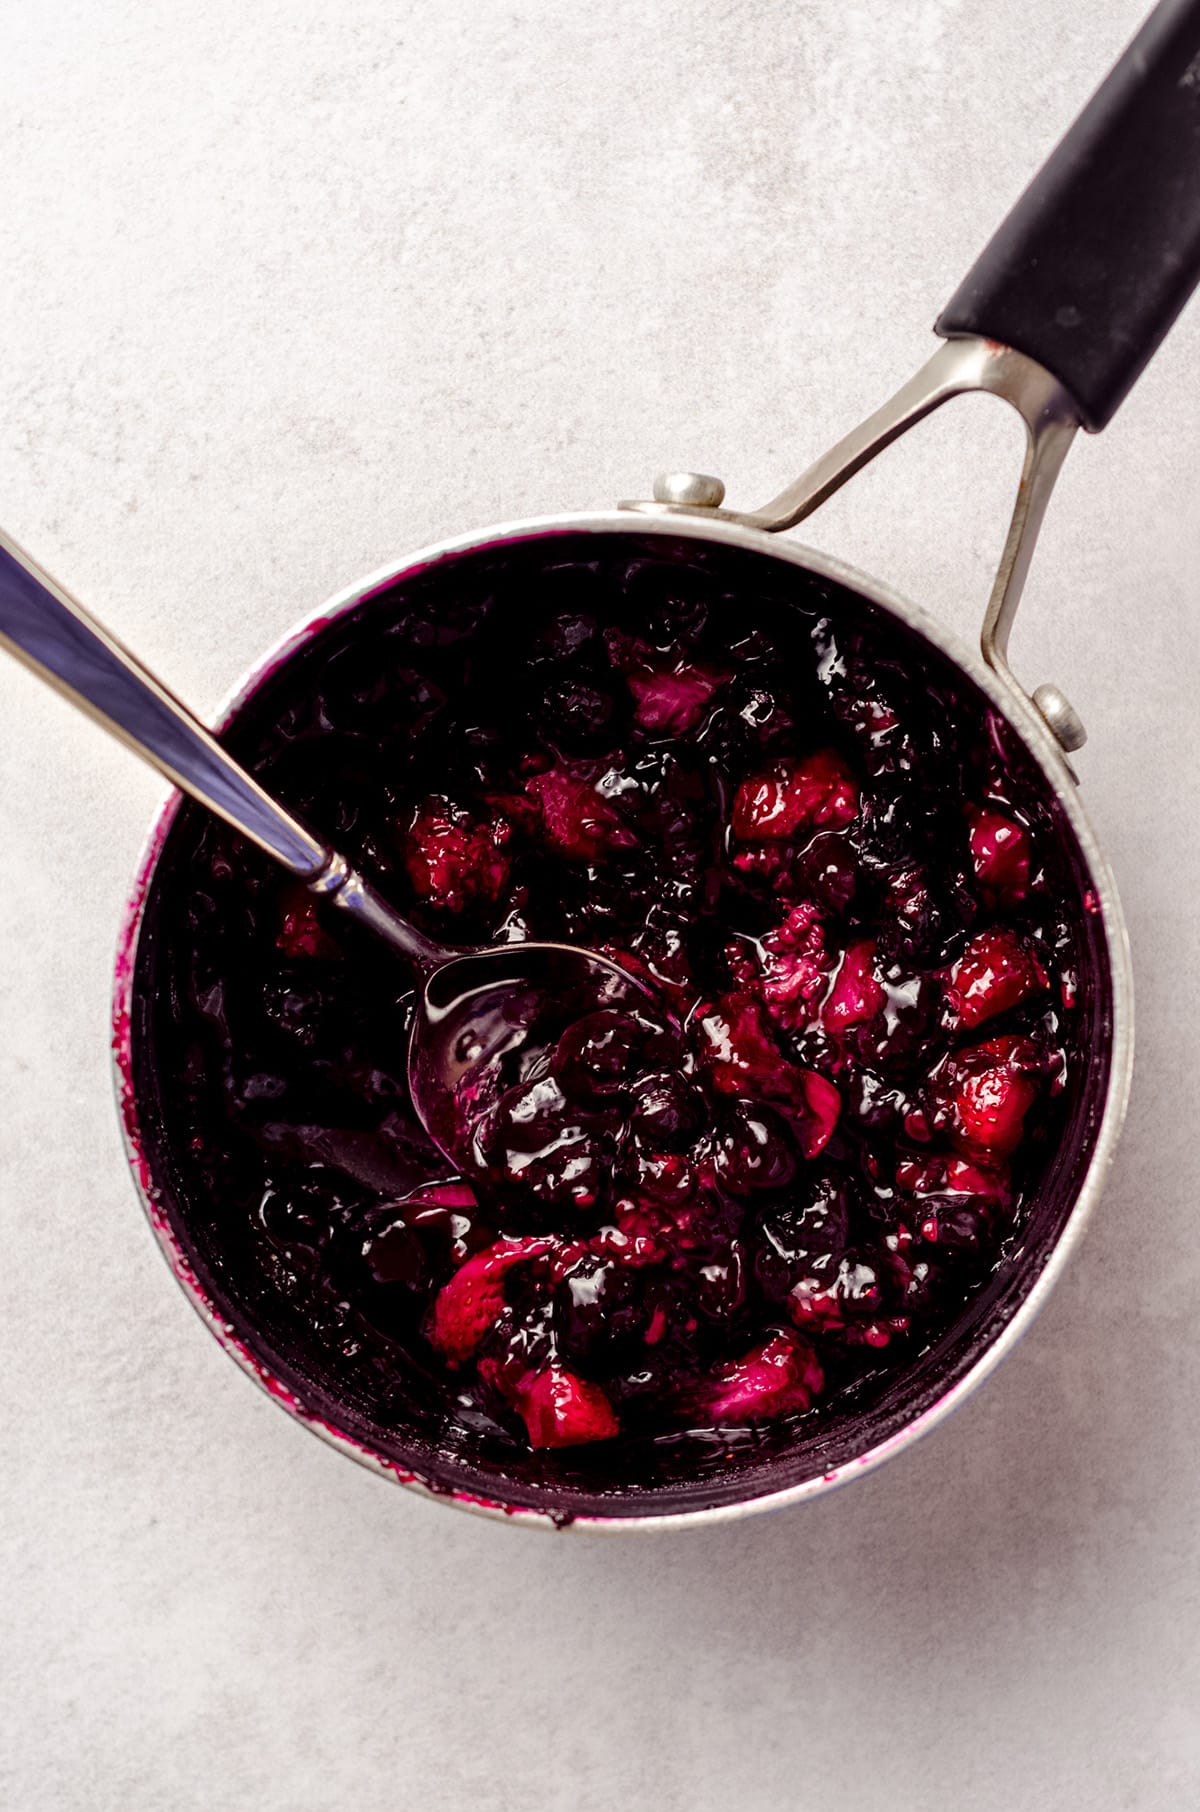 A simmered and thickened berry compote in a saucepan.